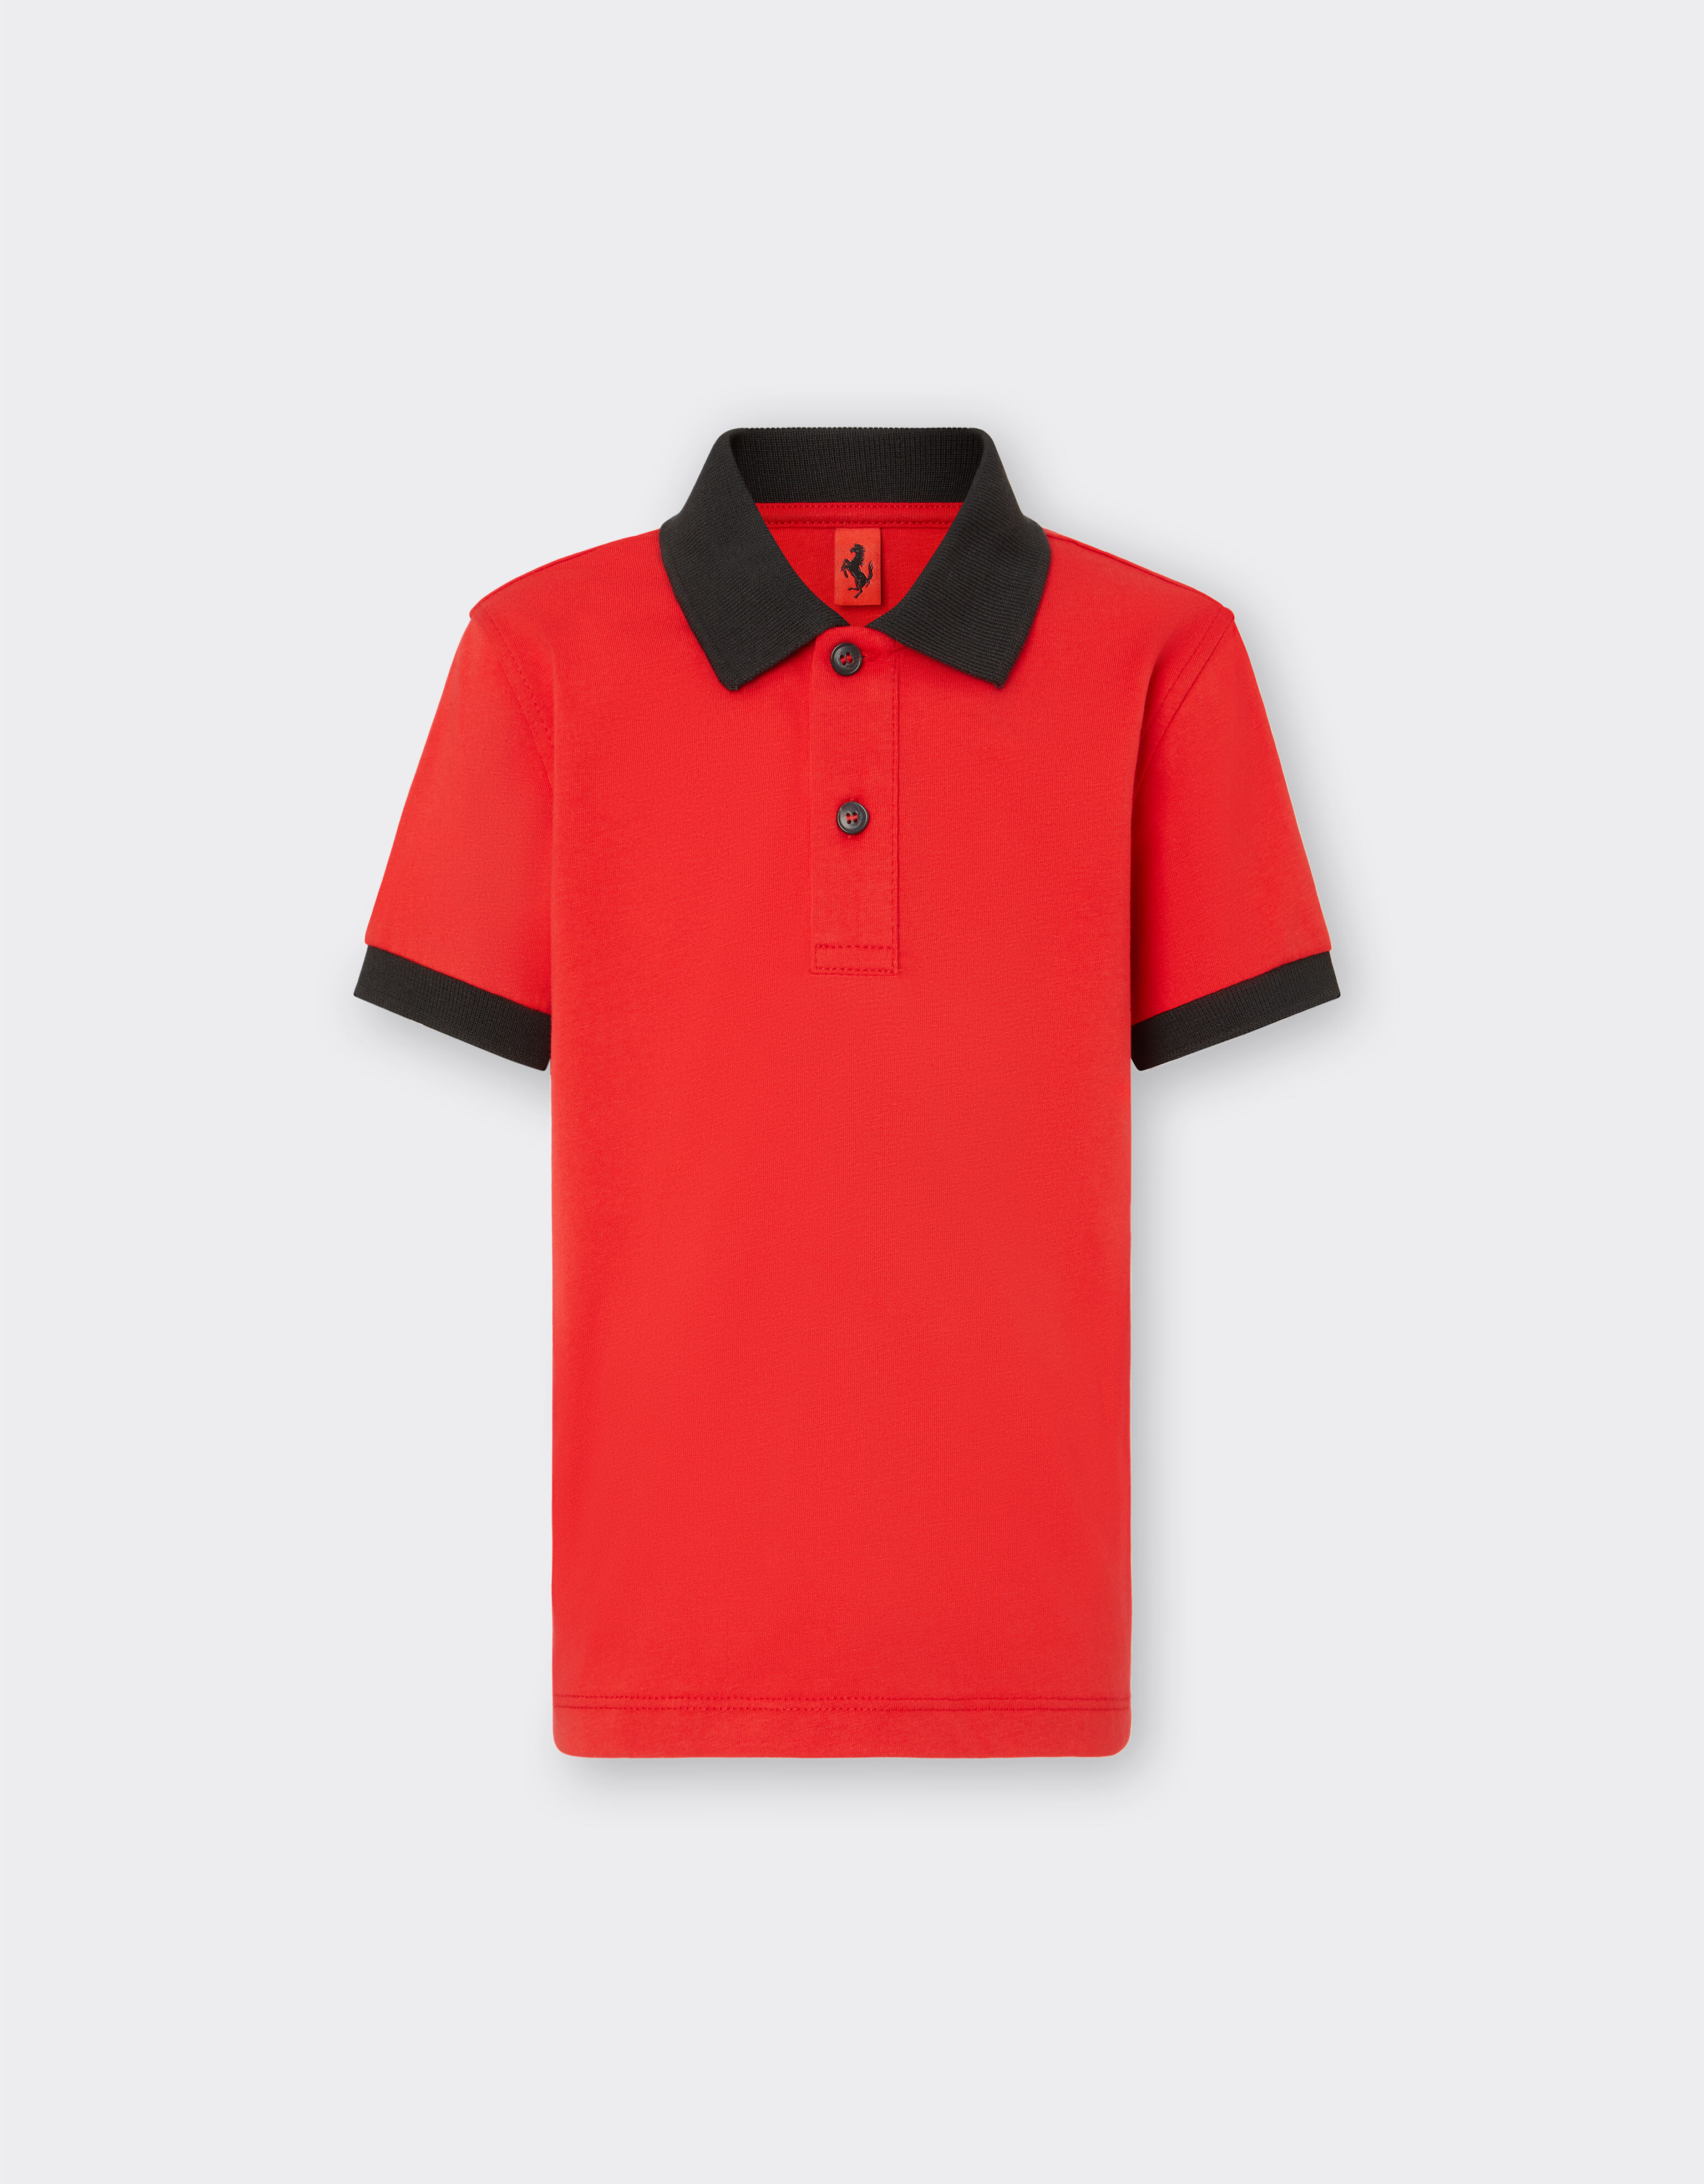 Ferrari Short sleeves - Contrast collar and cuffs - Front buttoning Rosso Corsa F1149fK